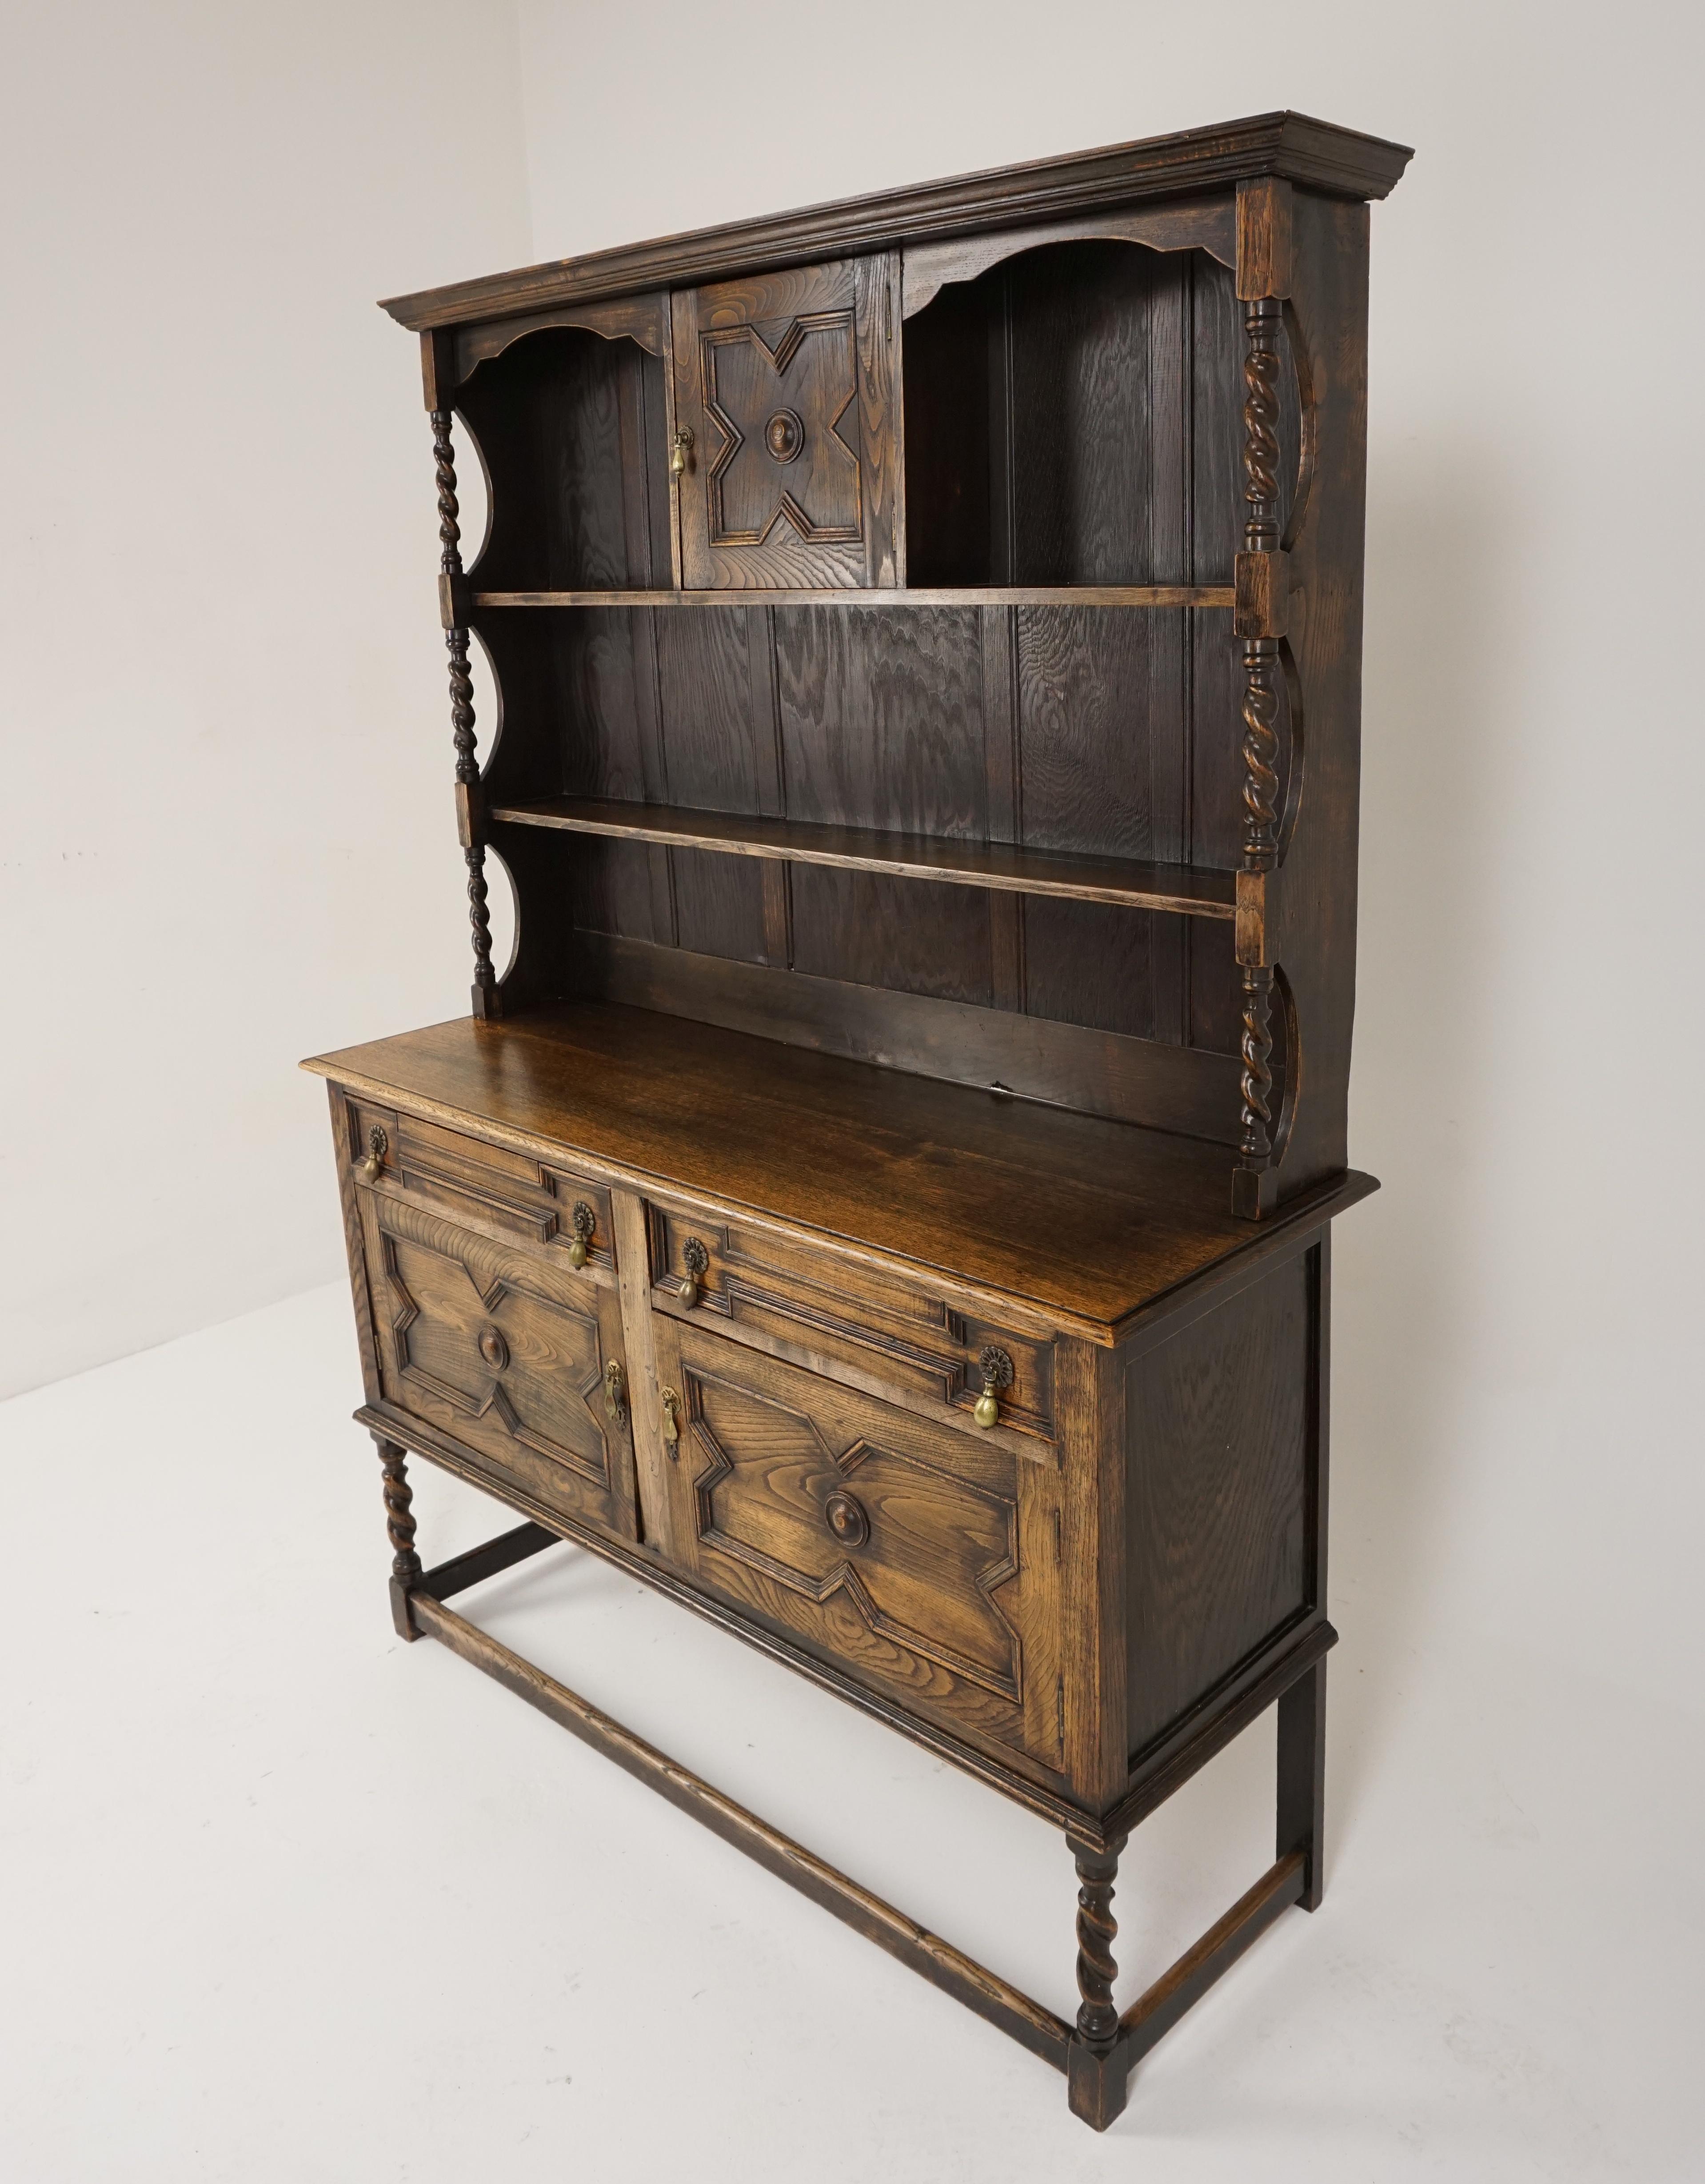 Antique oak sideboard, barley twist welsh dresser, buffet, Scotland 1910, B2850

Scotland 1910
Solid oak
Original finish
Moulded cornice above open shelving
A paneled door to the center
Barley twist supports on the ends
The base has two